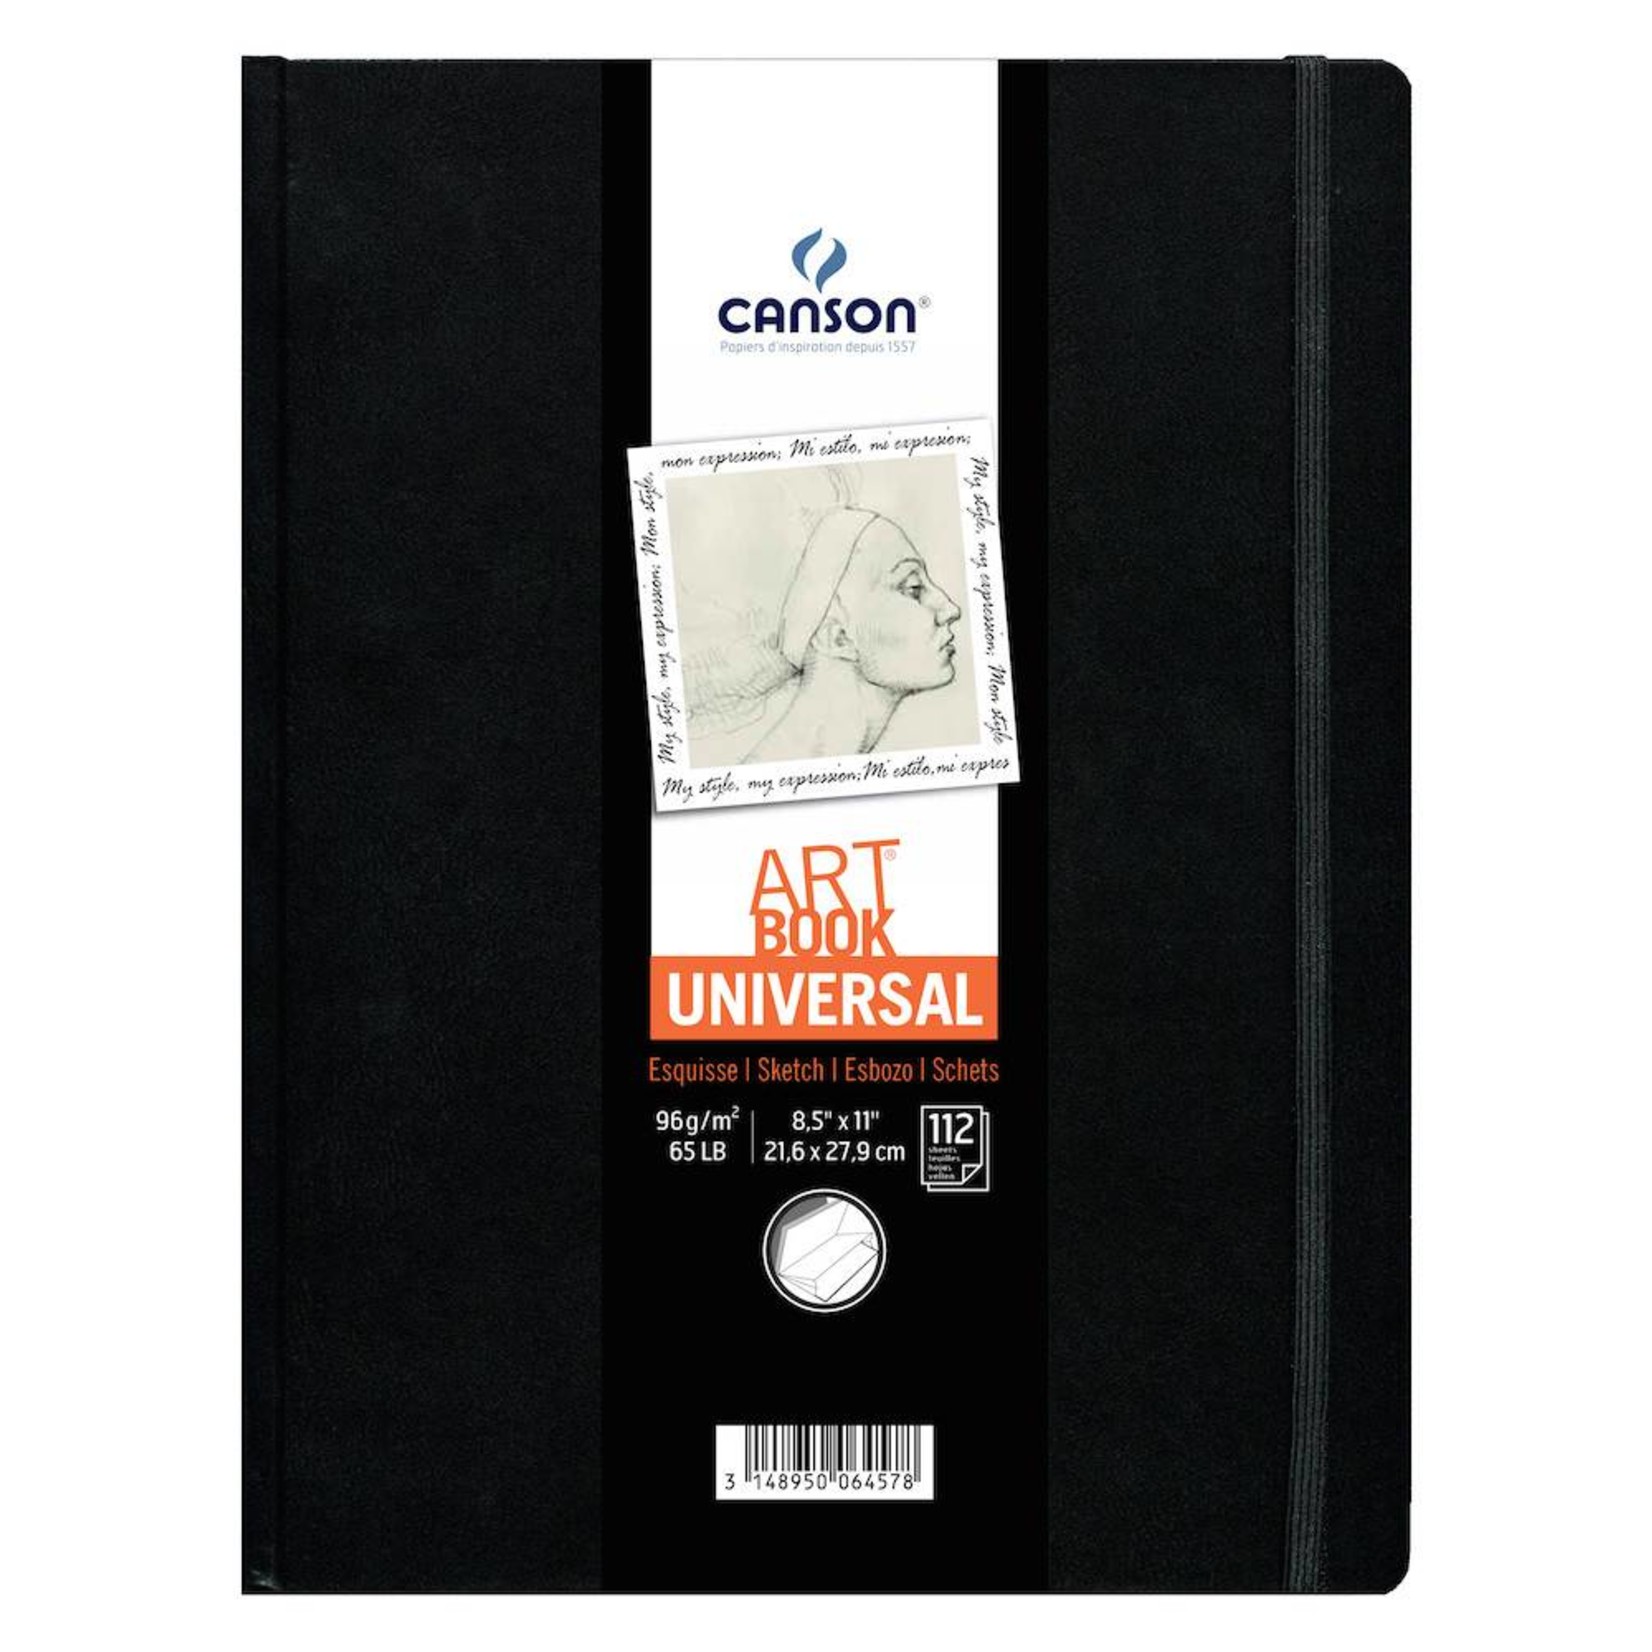 CANSON CANSON UNIVERSAL ART BOOK 8.5X11 65LB  112/SHT    CAN-200006457